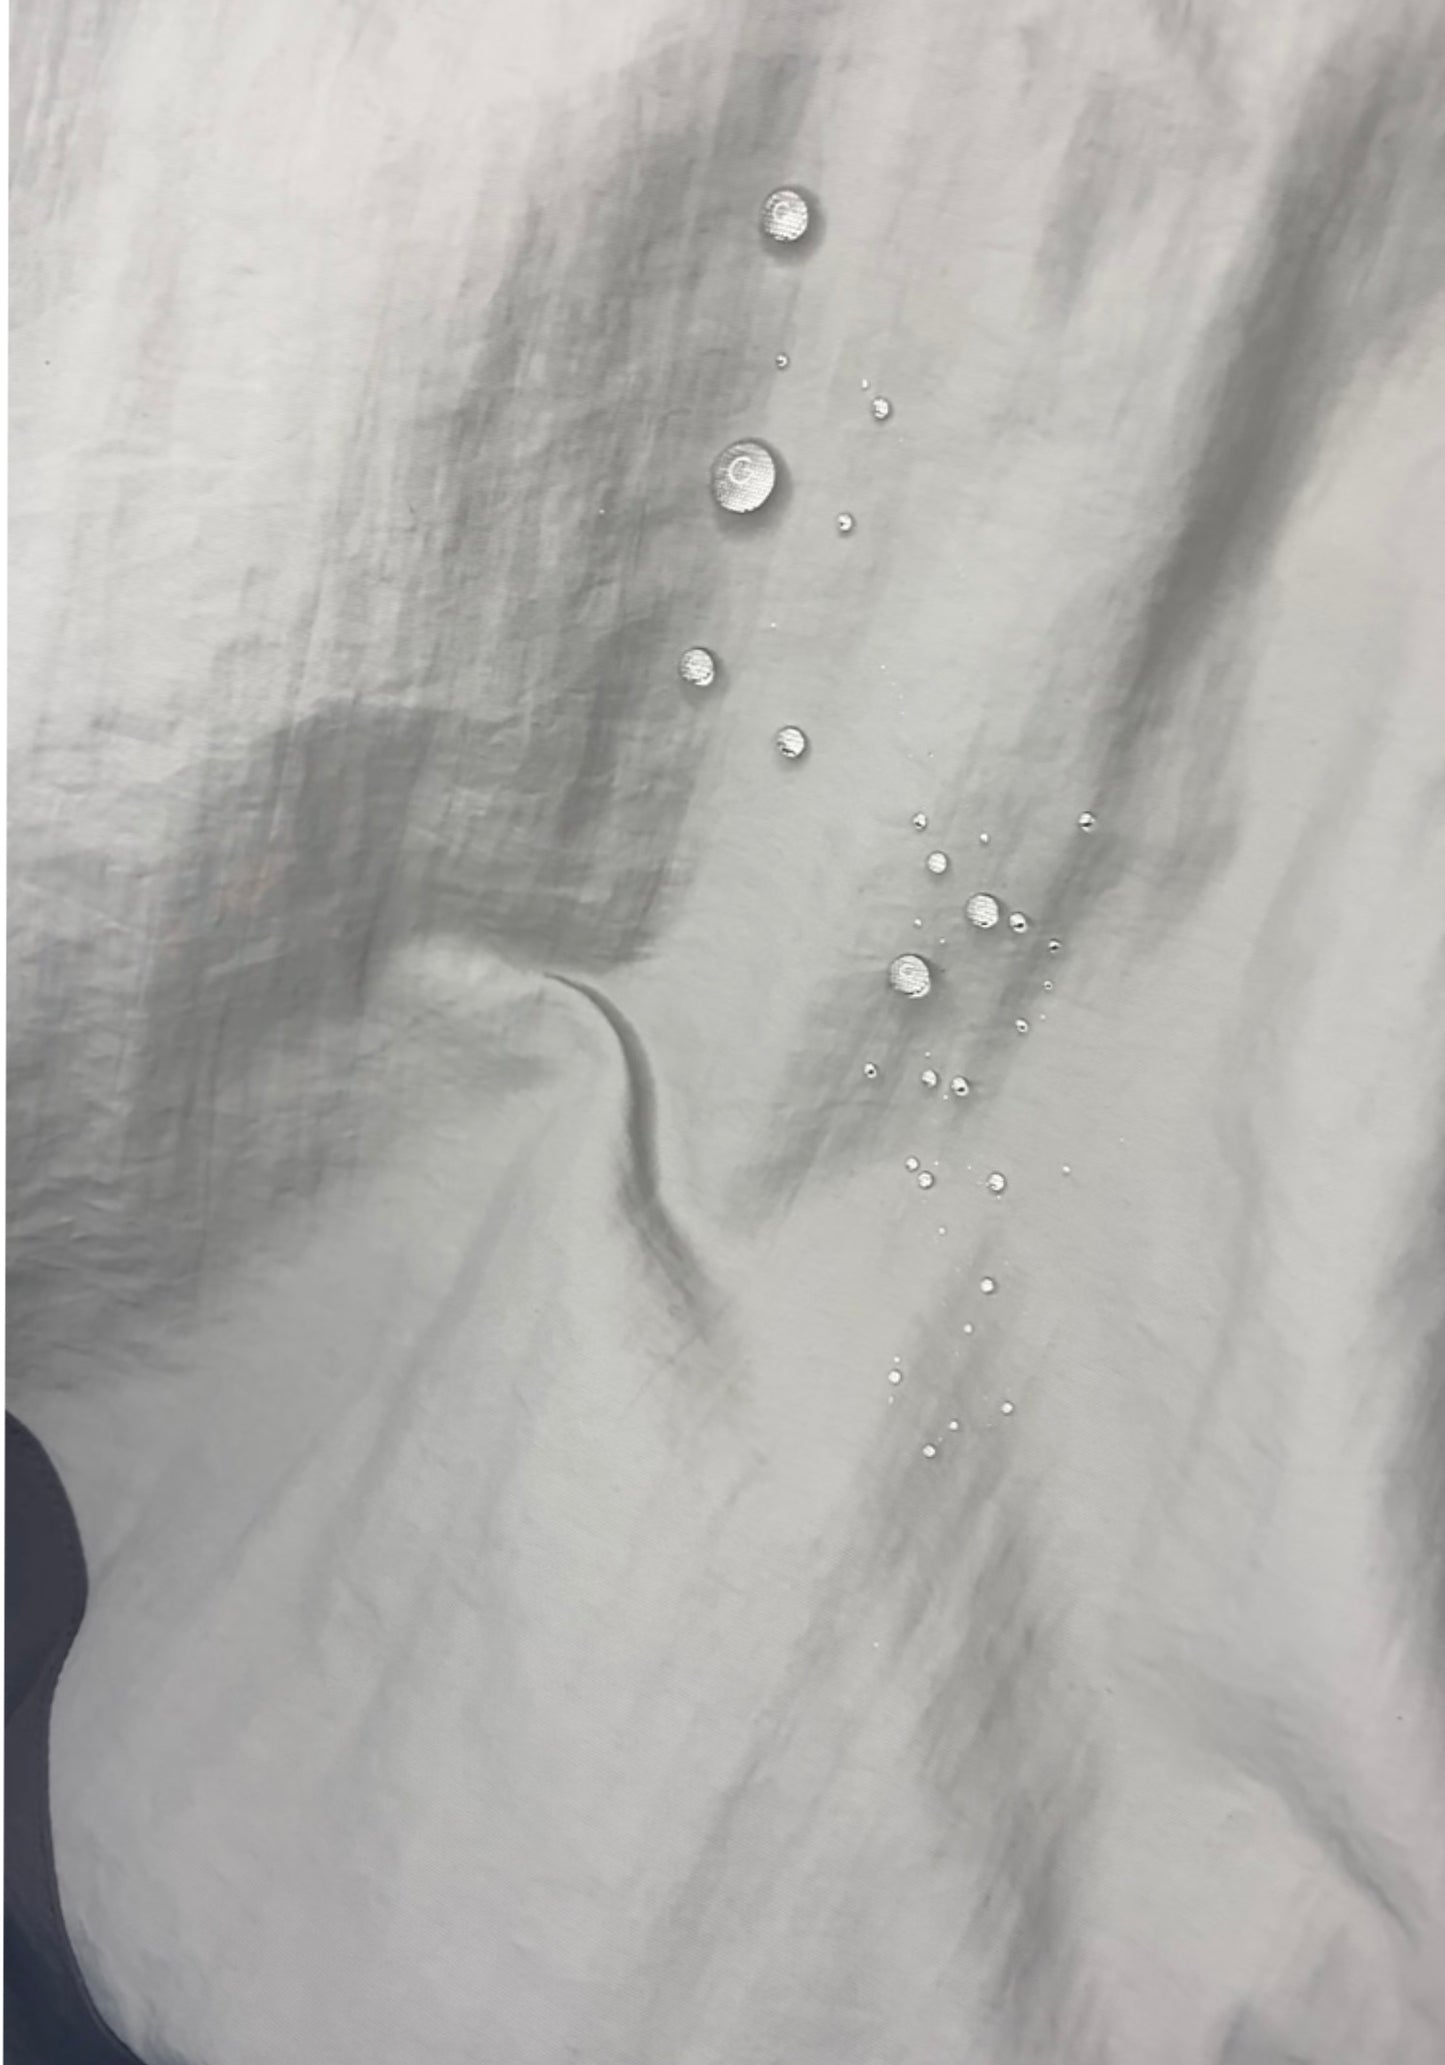 polyester fabric with water droplets over it